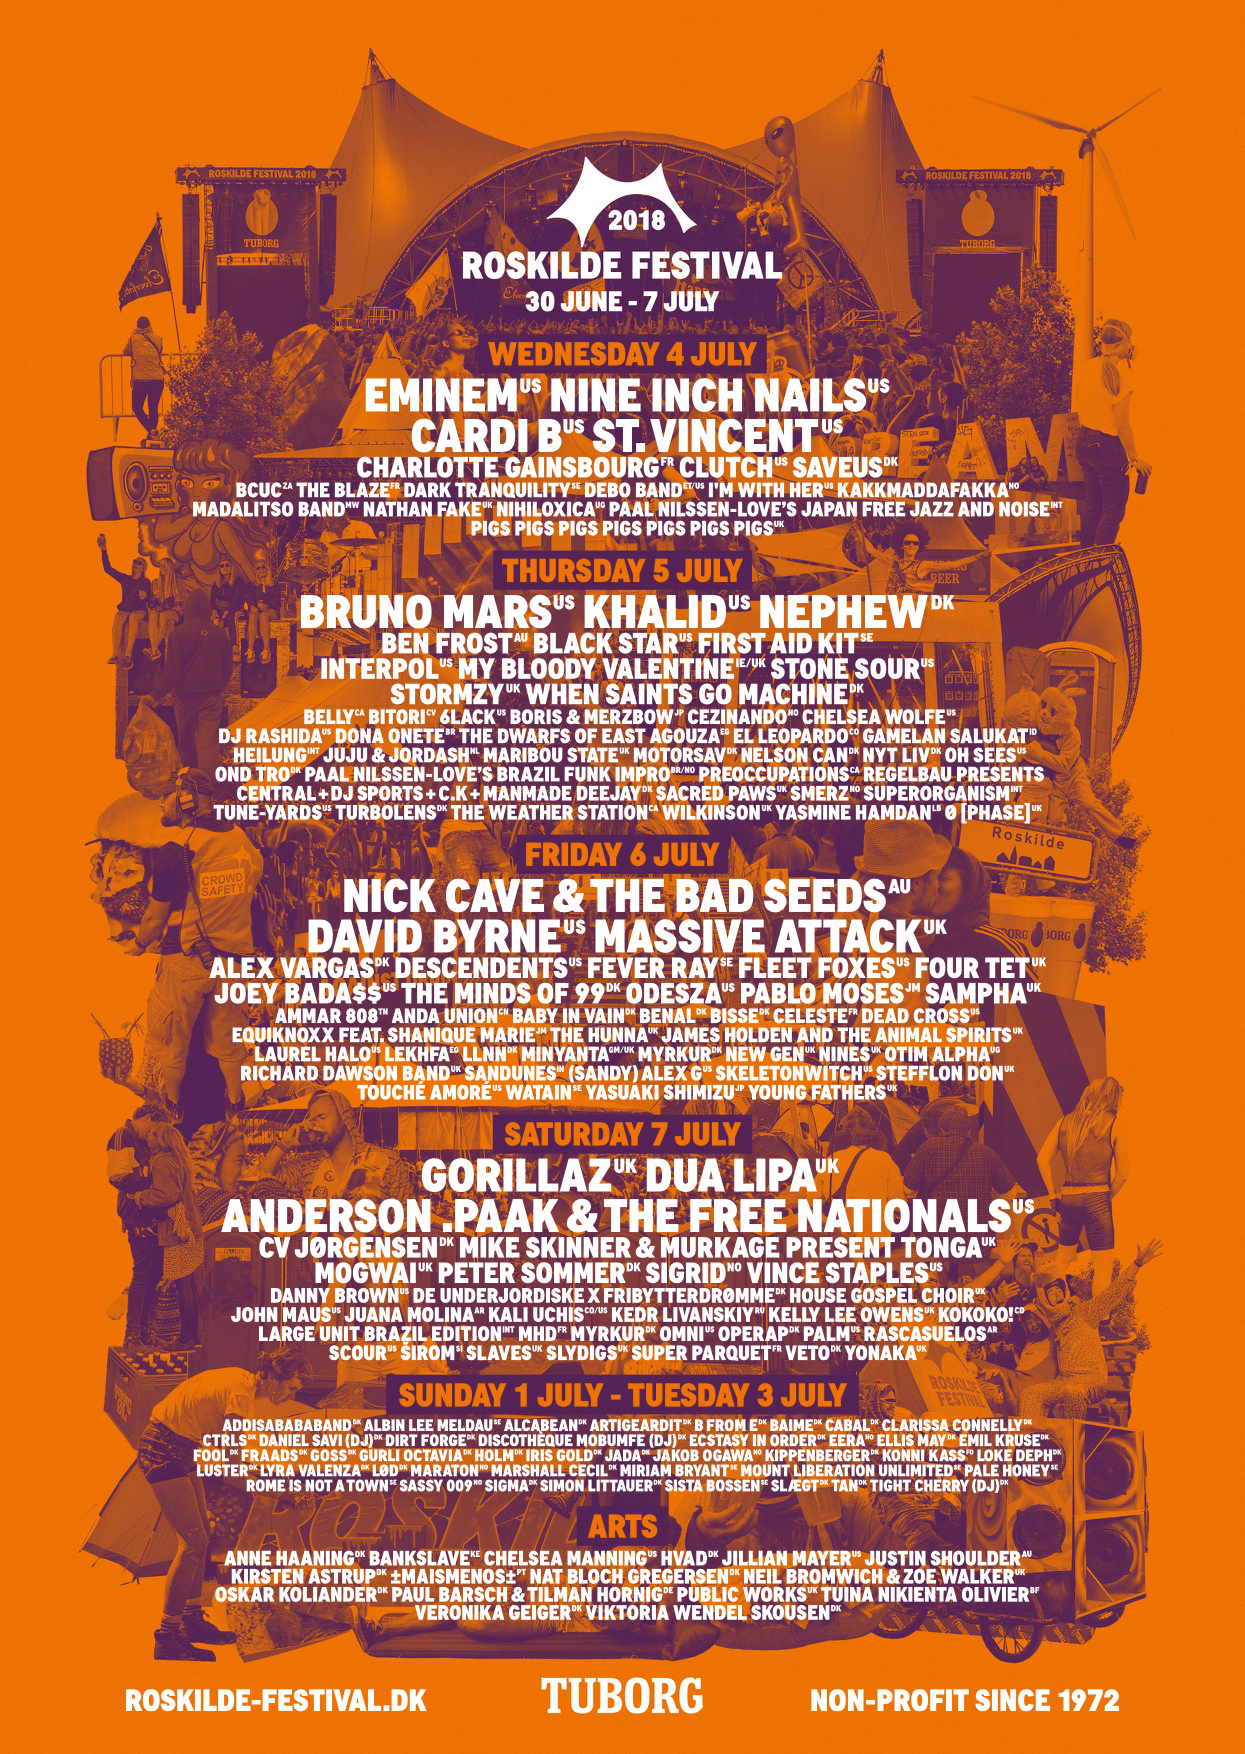 ROSKILDE FESTIVAL COMPLETES LINEUP WITH NICK CAVE, MASSIVE ATTACK, DUA LIPA & MANY MORE